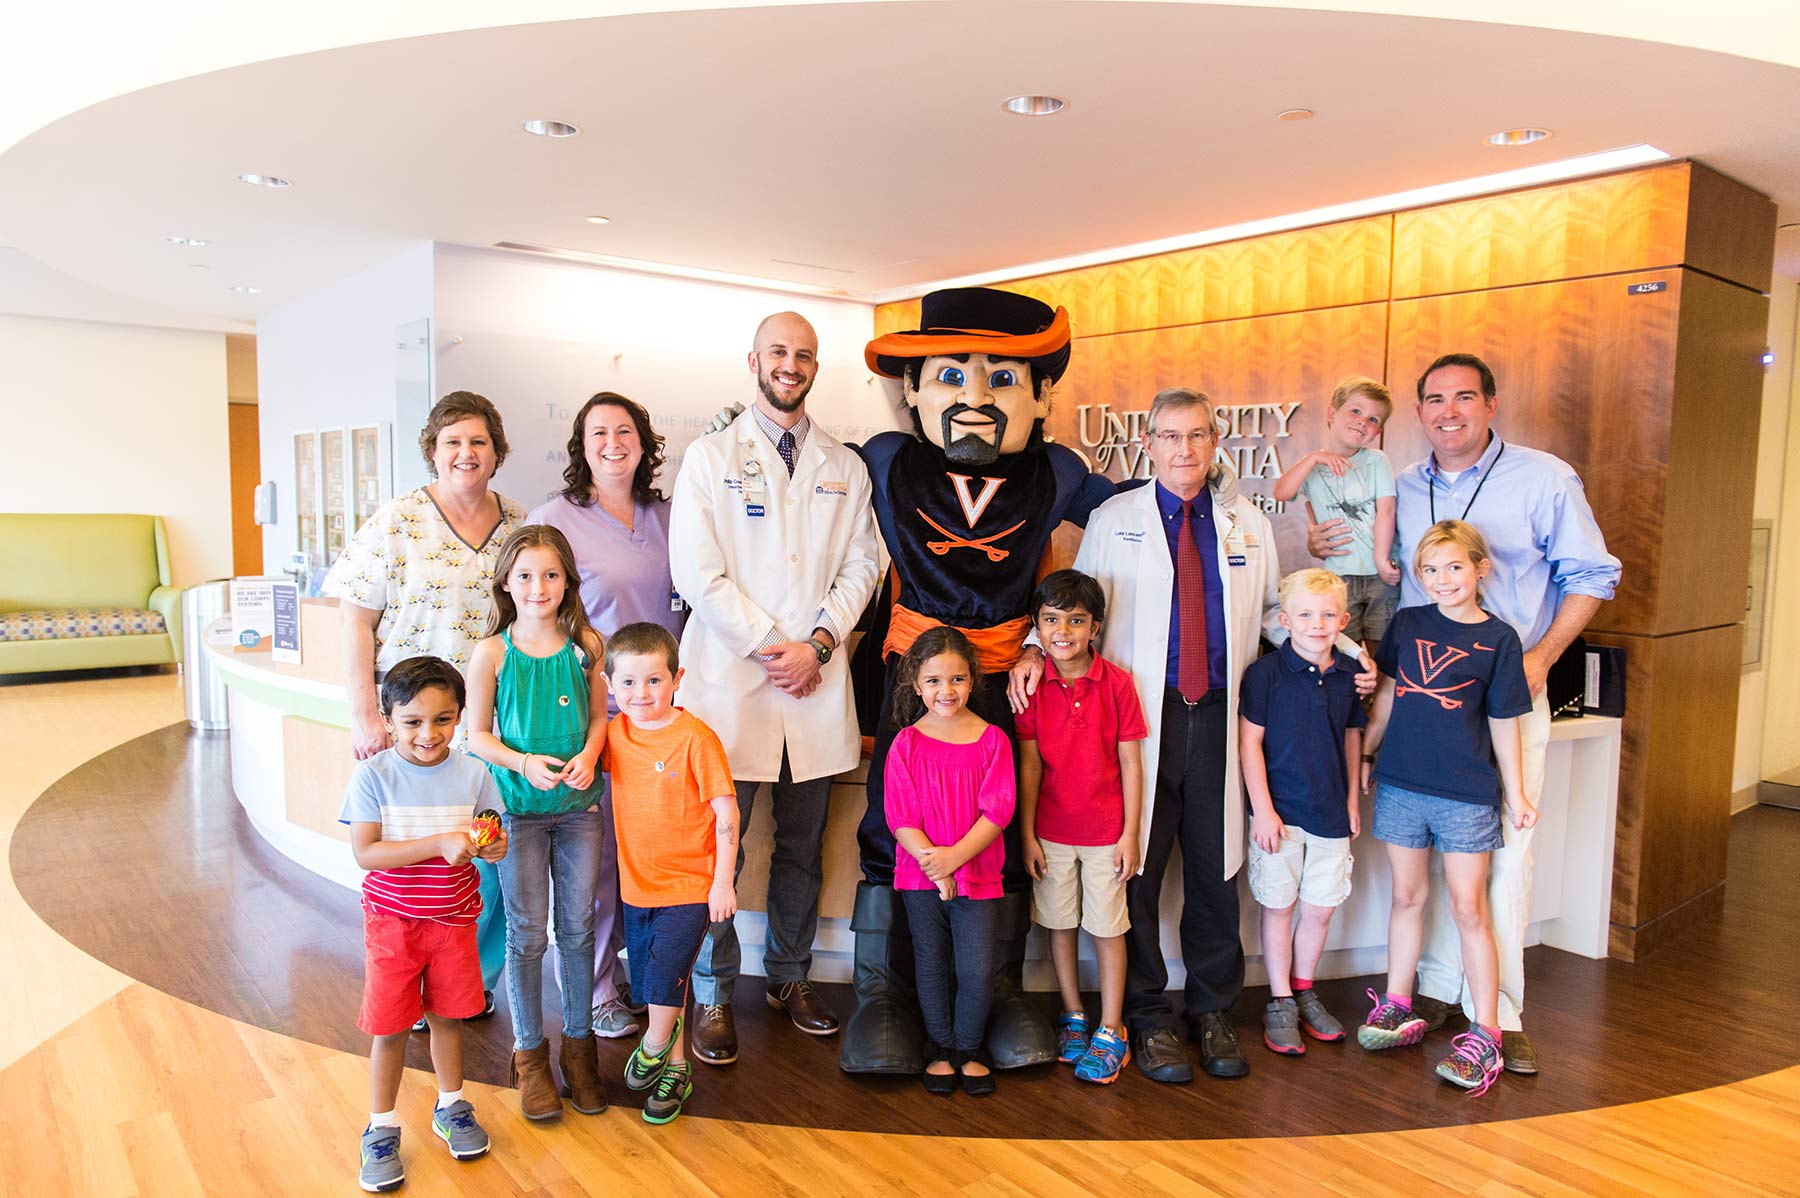 UVA Cavman and pediatric radiologists stand with children and parents